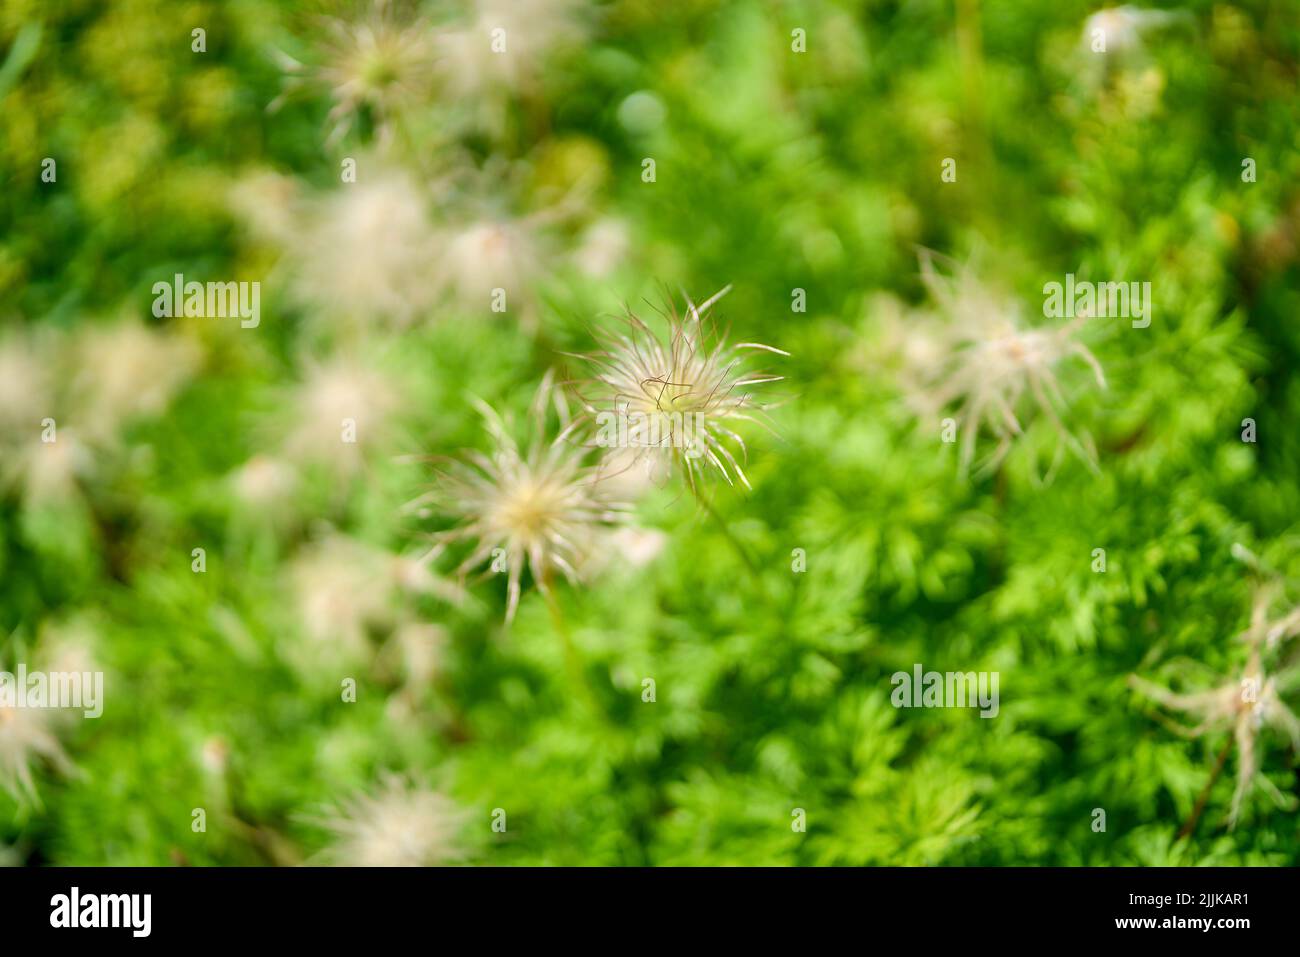 A shallow focus shot of blossom Pulsatilla alpina flowers with a garden blurred background Stock Photo